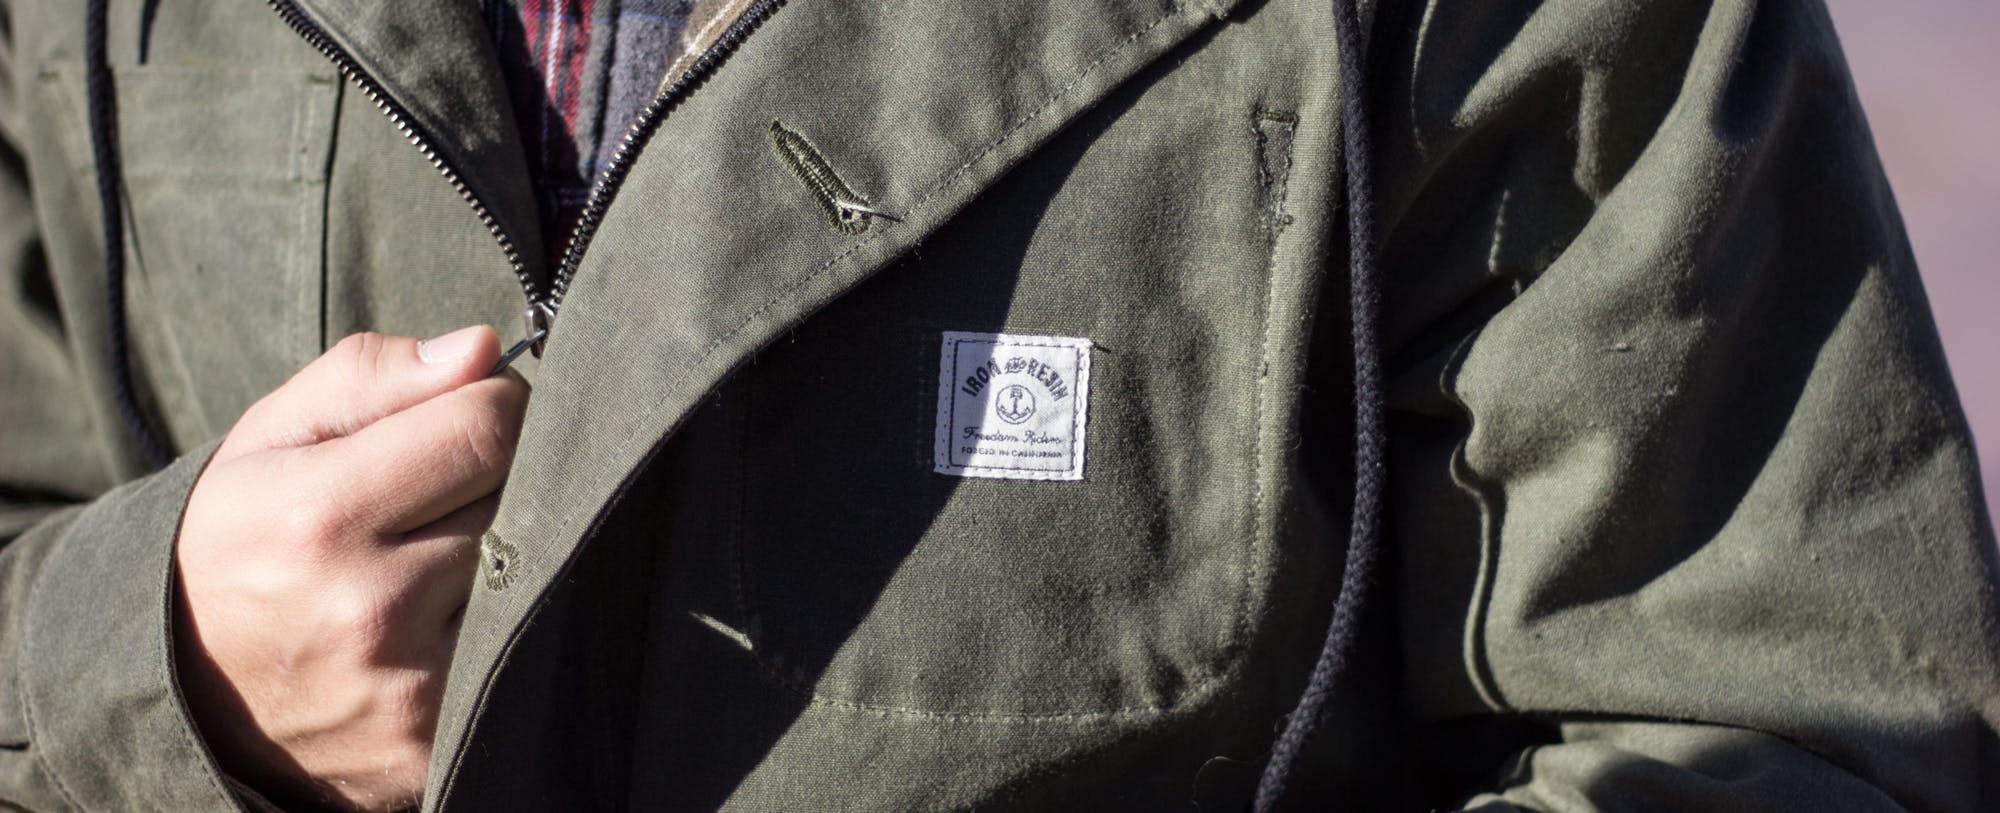 Iron and Resin Jackets: Their Threads, Your Story